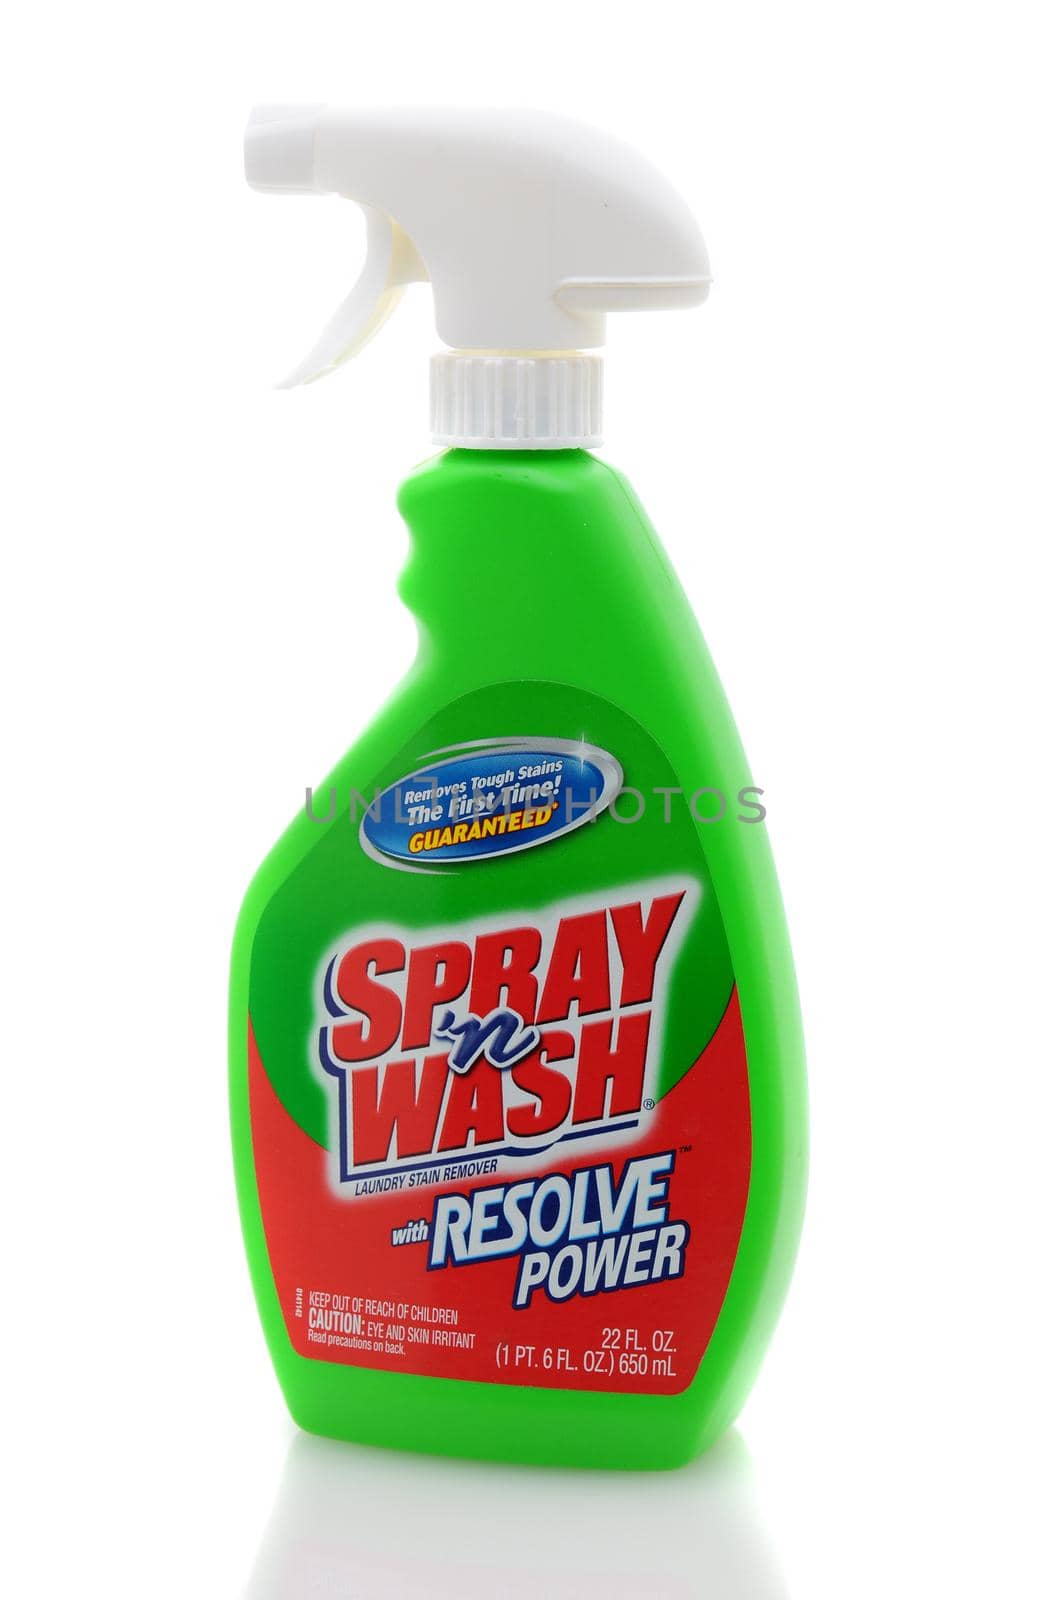 IRVINE, CALIFORNIA - 31 JAN 2011: Single 22oz bottle of Spray 'n Wash Laundry Stain Remover on a white background.